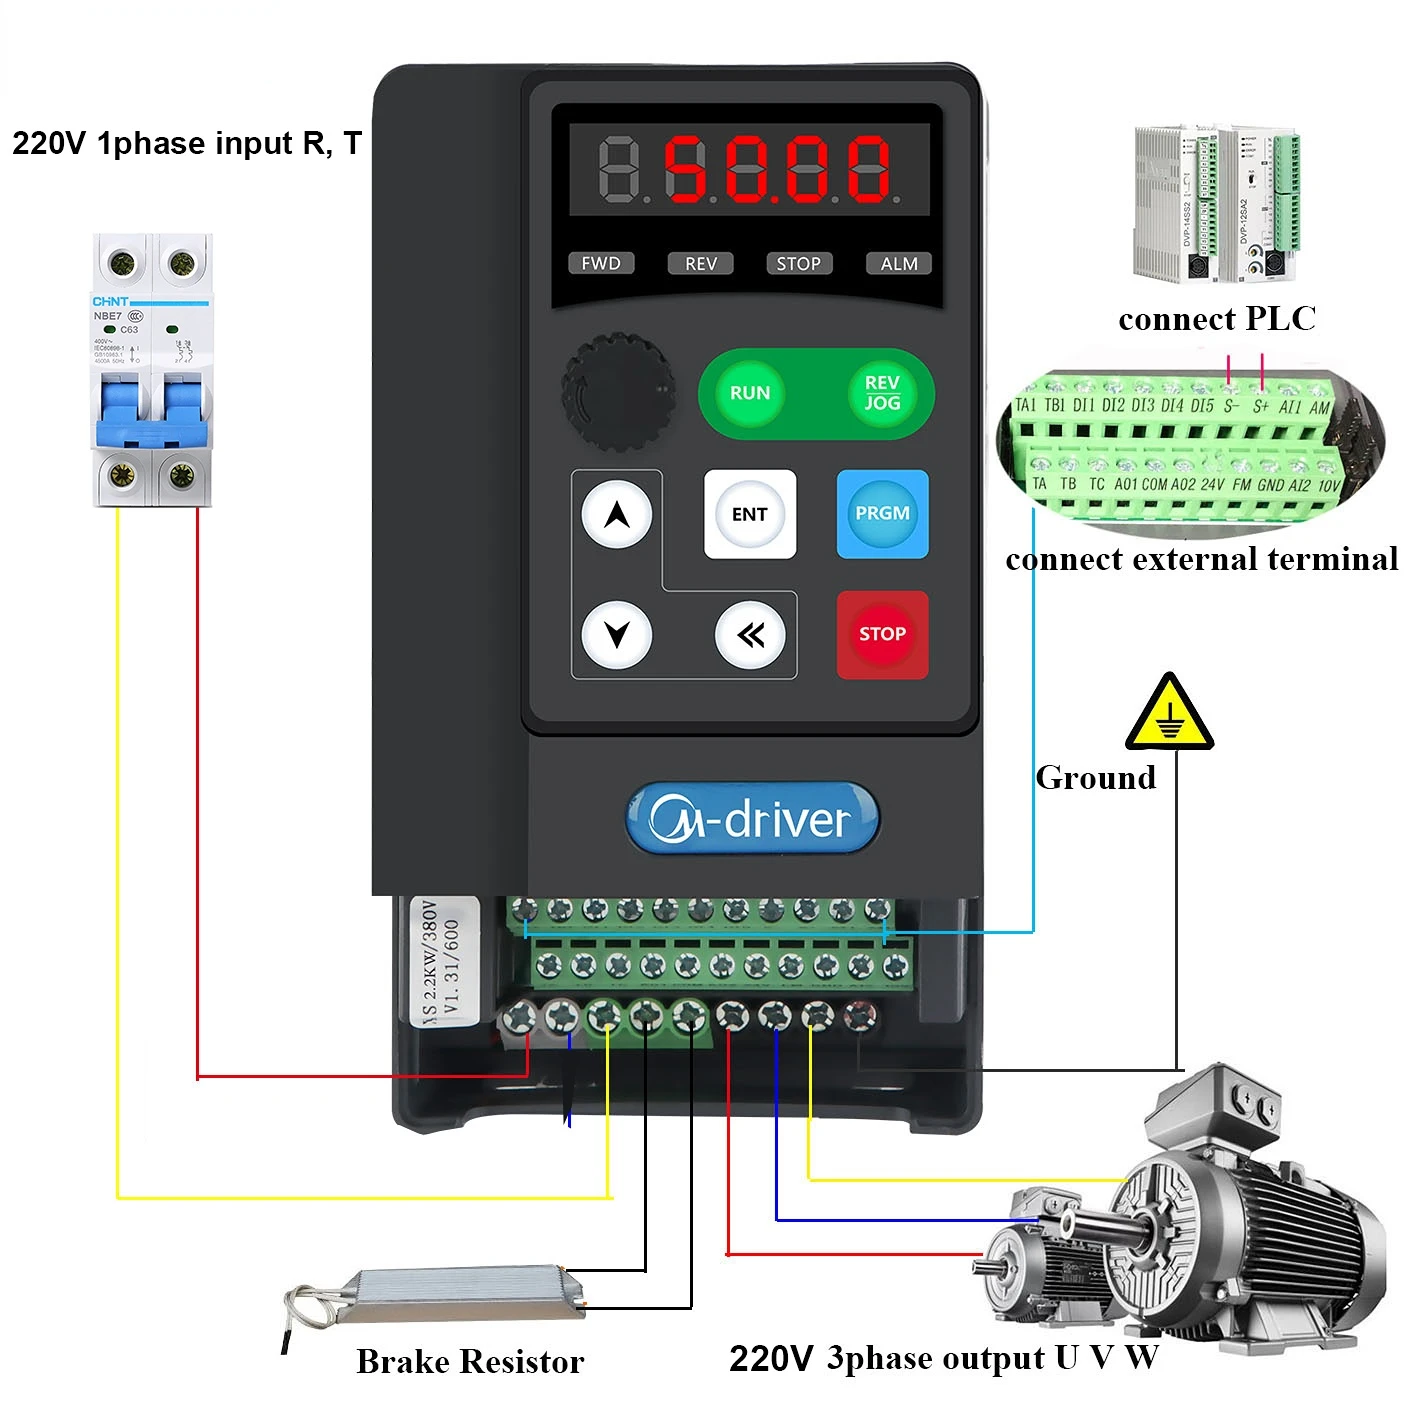 

Single phase 220V VFD drives 1hp 2hp 3hp variable frequency inverter 0.75kw 1.5kw 2.2kw